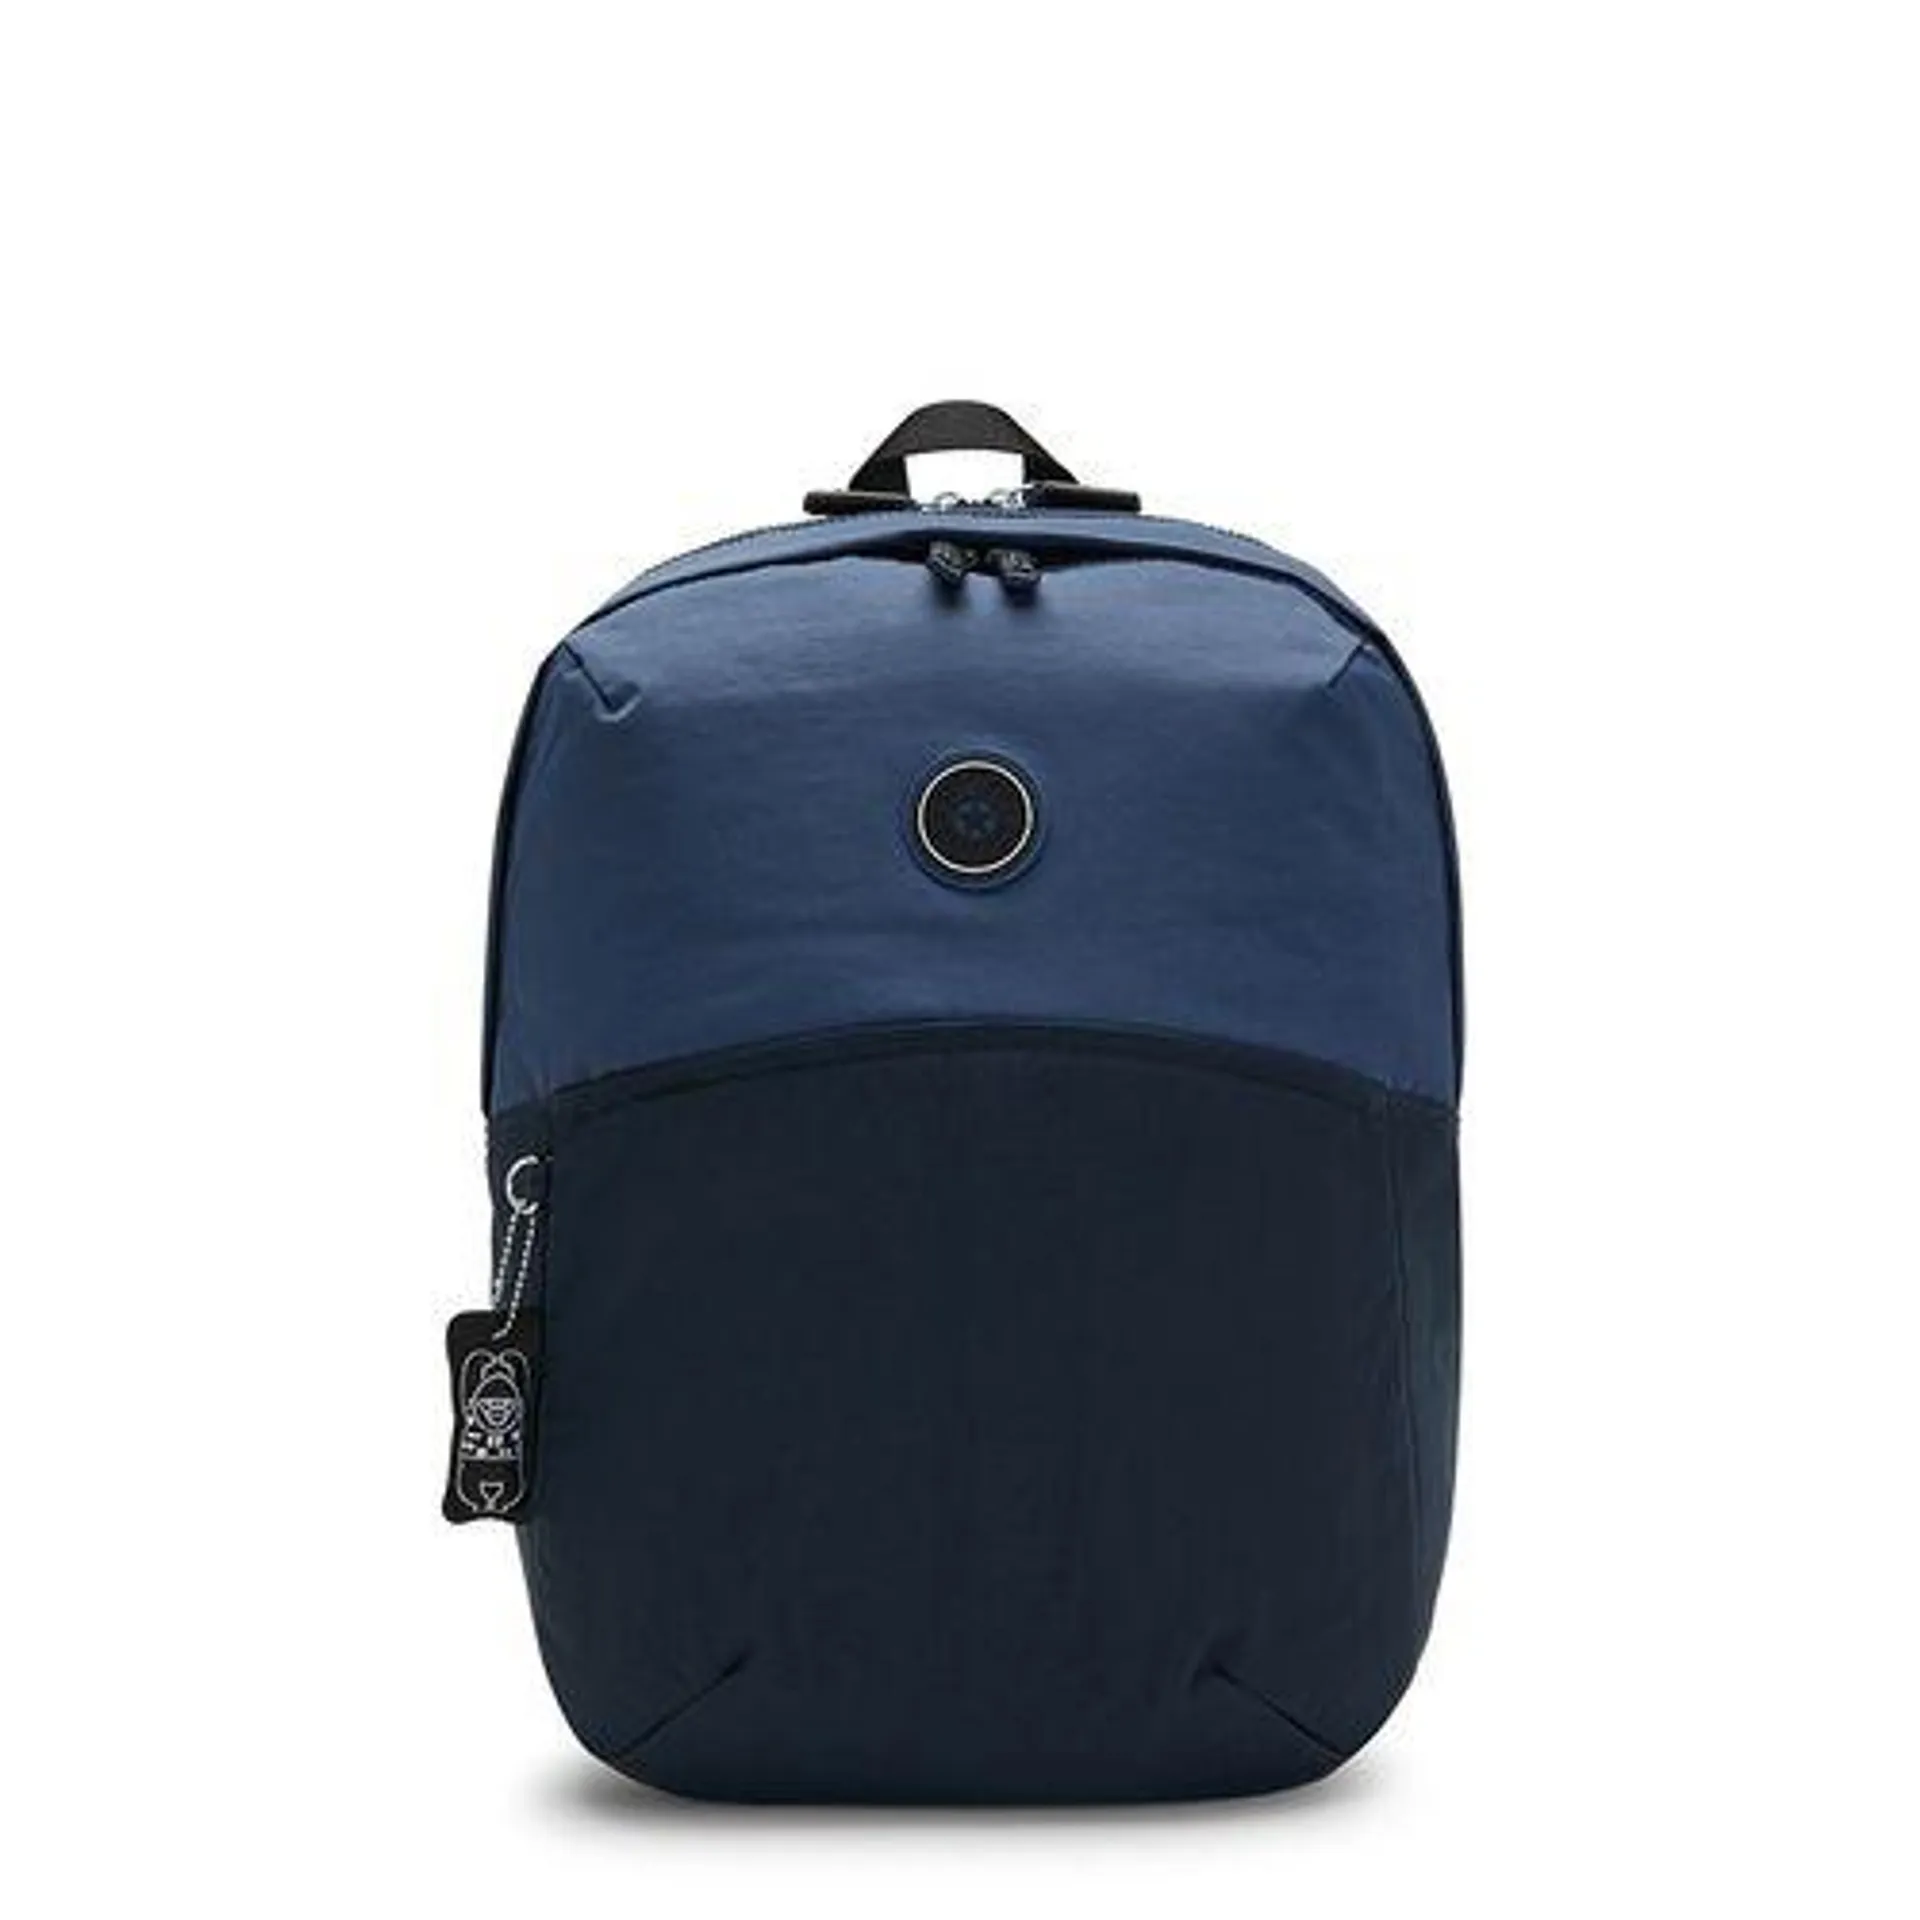 MORRAL AYANO - Color W81